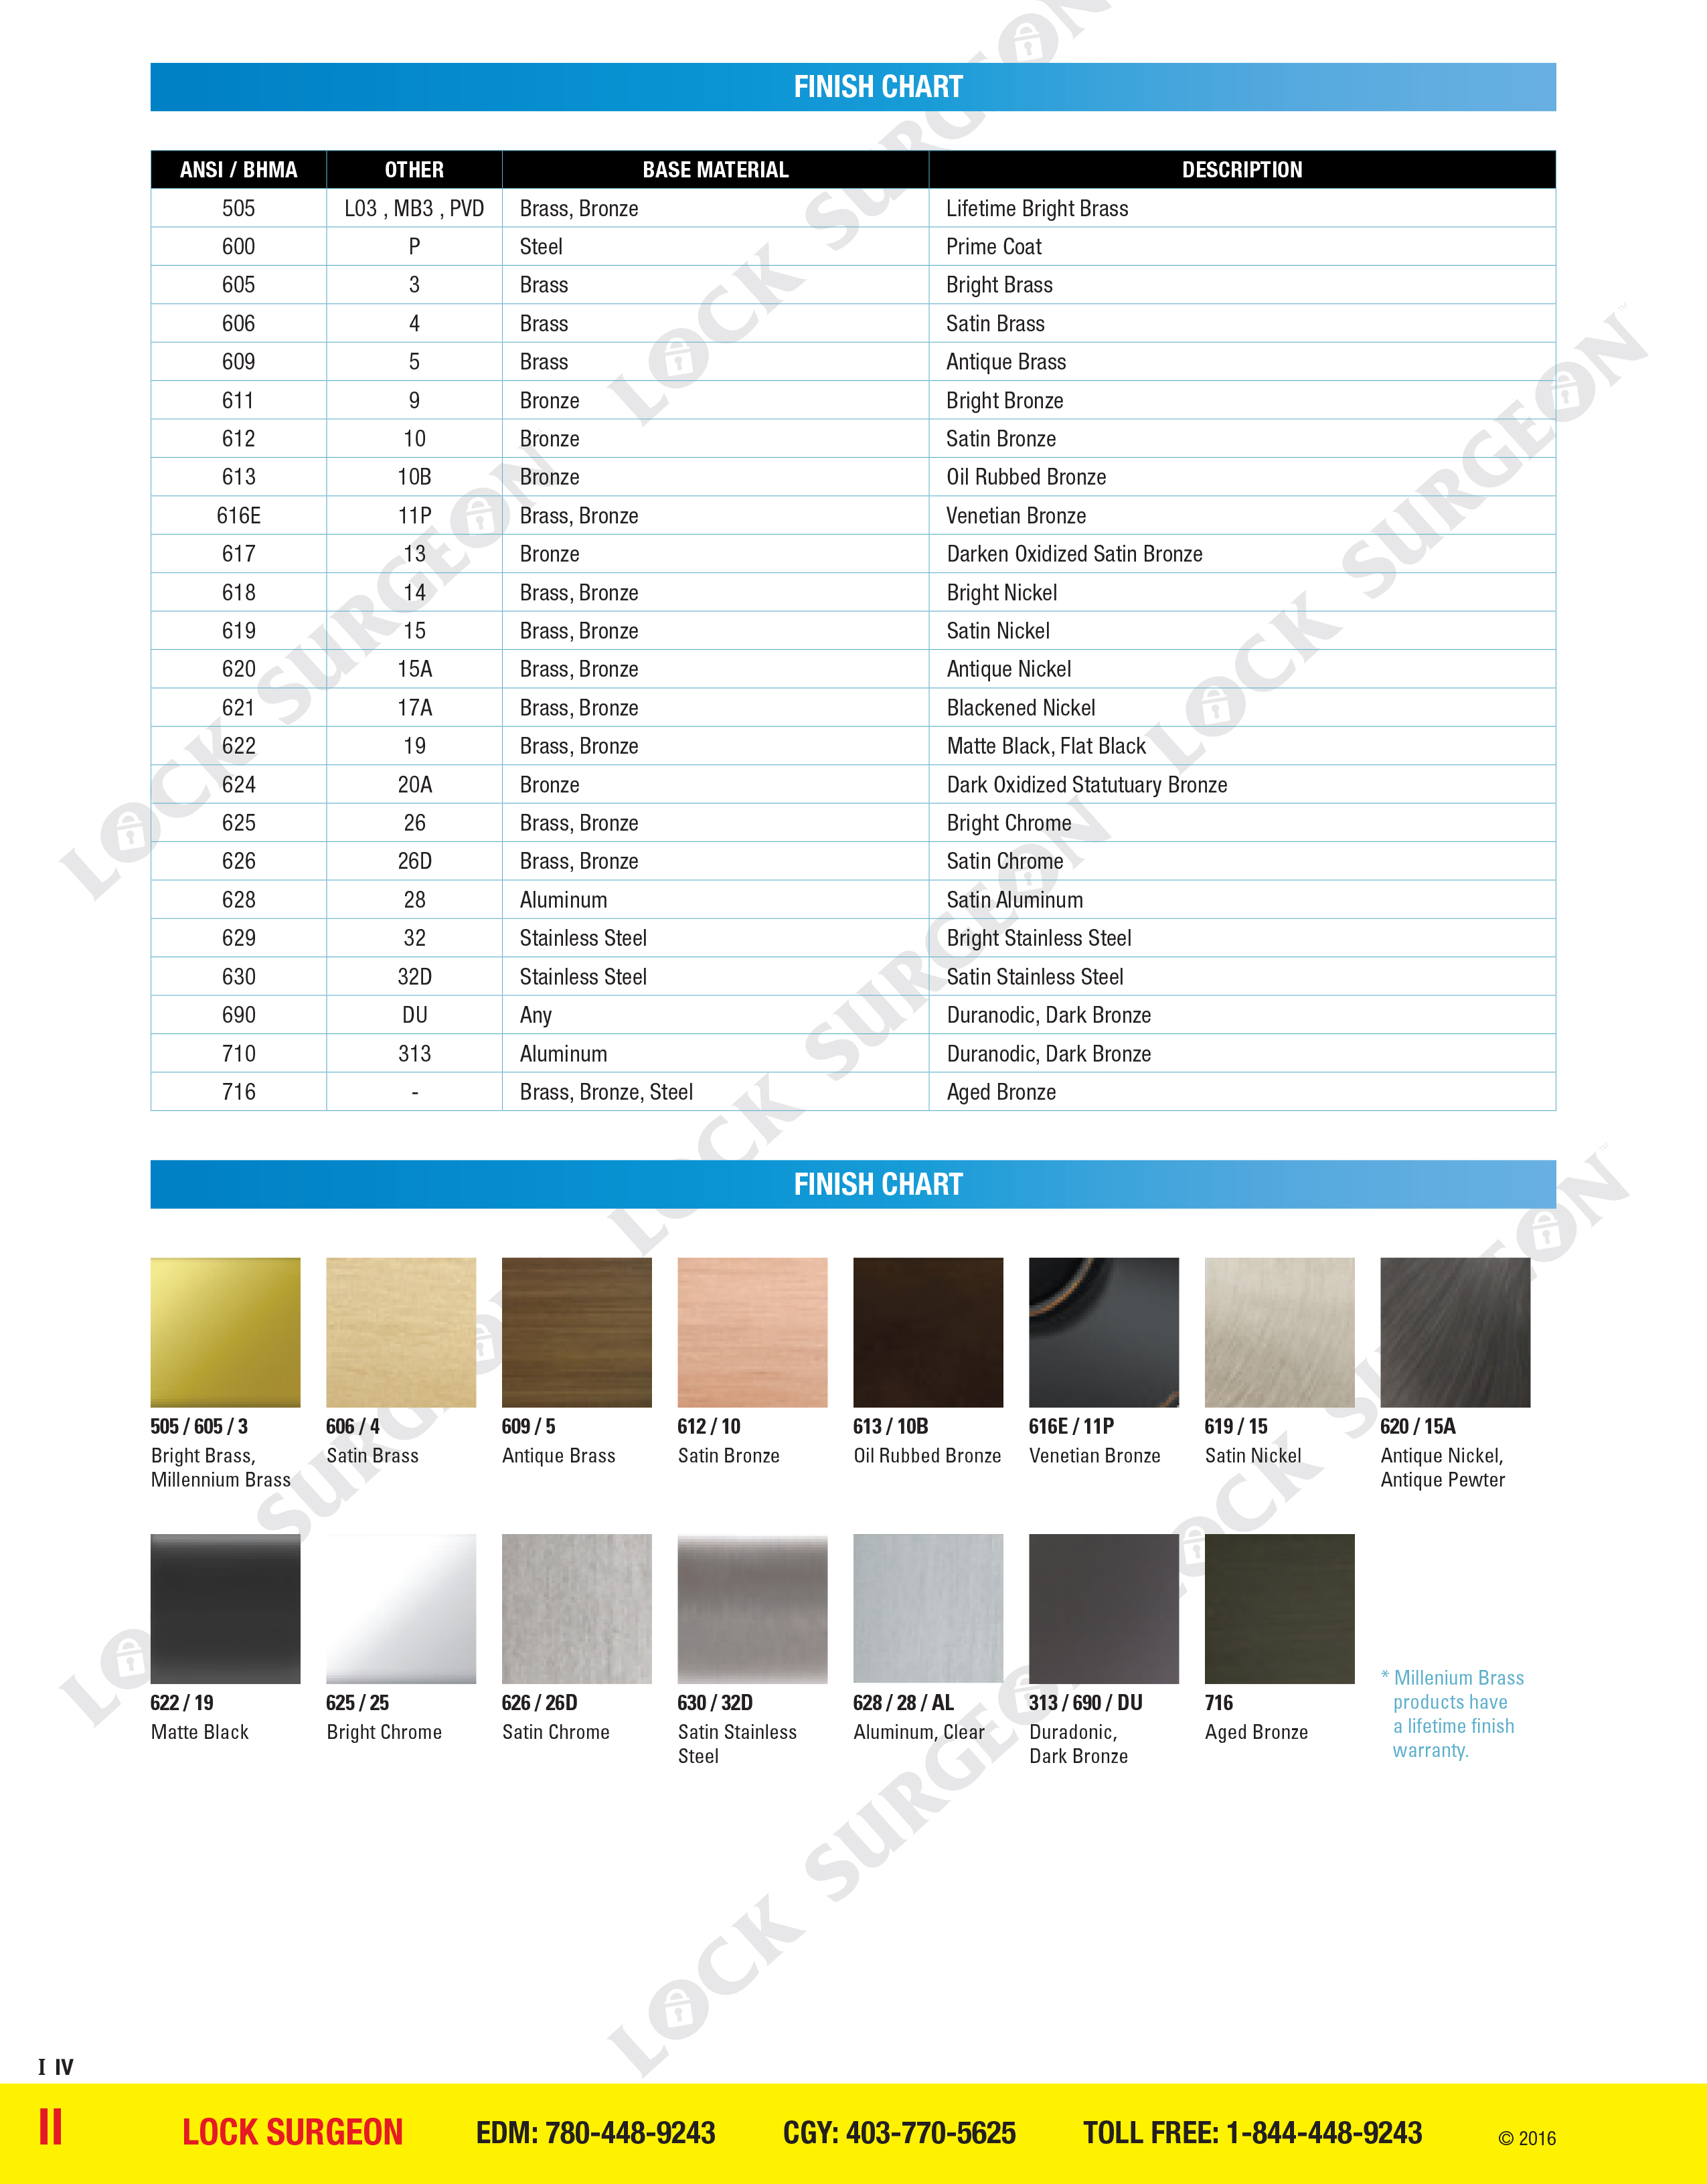 Colour reference chart for colour finishes on door handle hardware products Nisku.